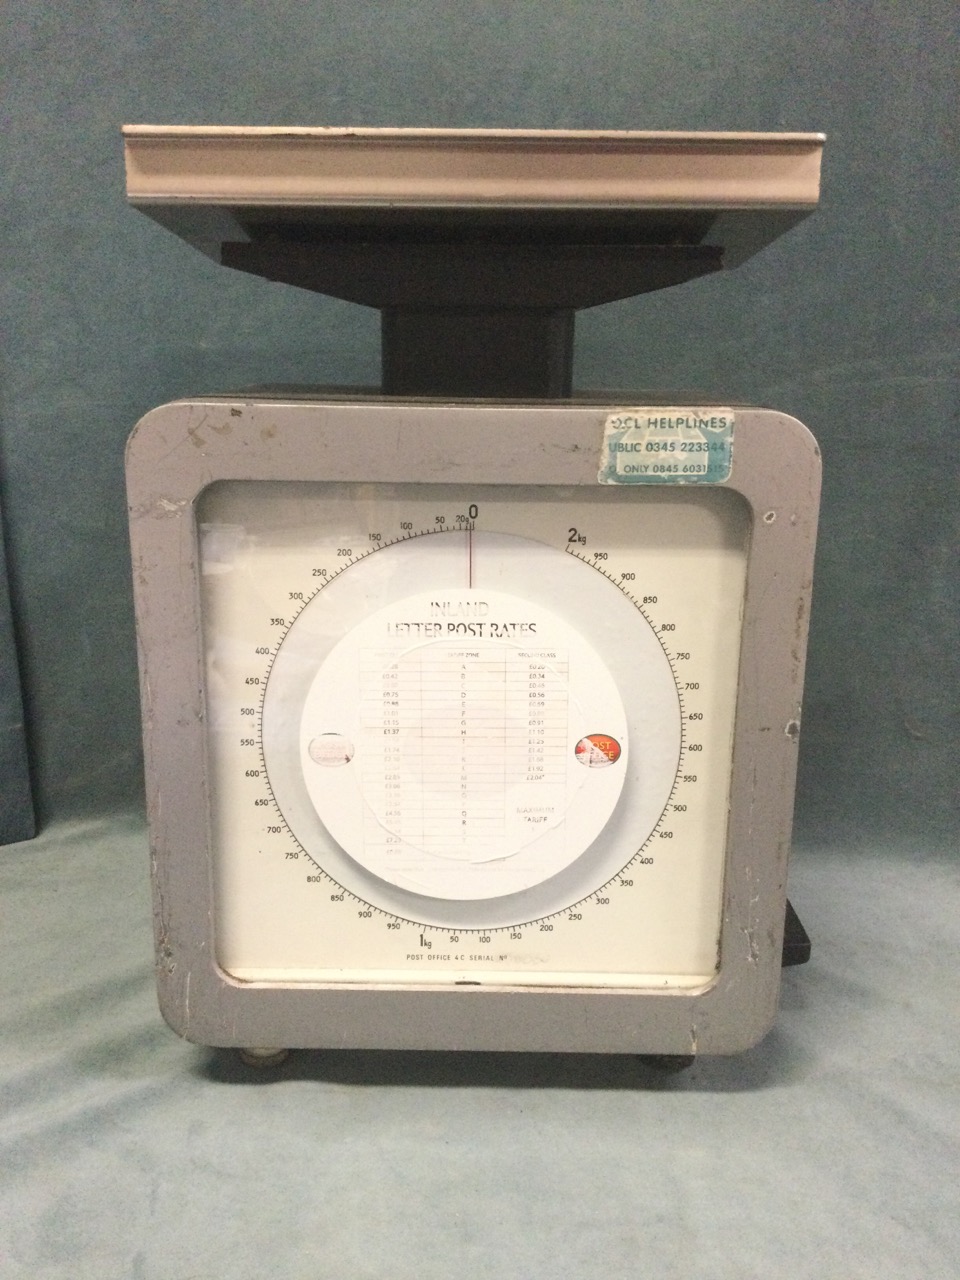 A set of 2006 Post Office scales by Avery Weigh-Tronix, with rounded square two-sided dial to